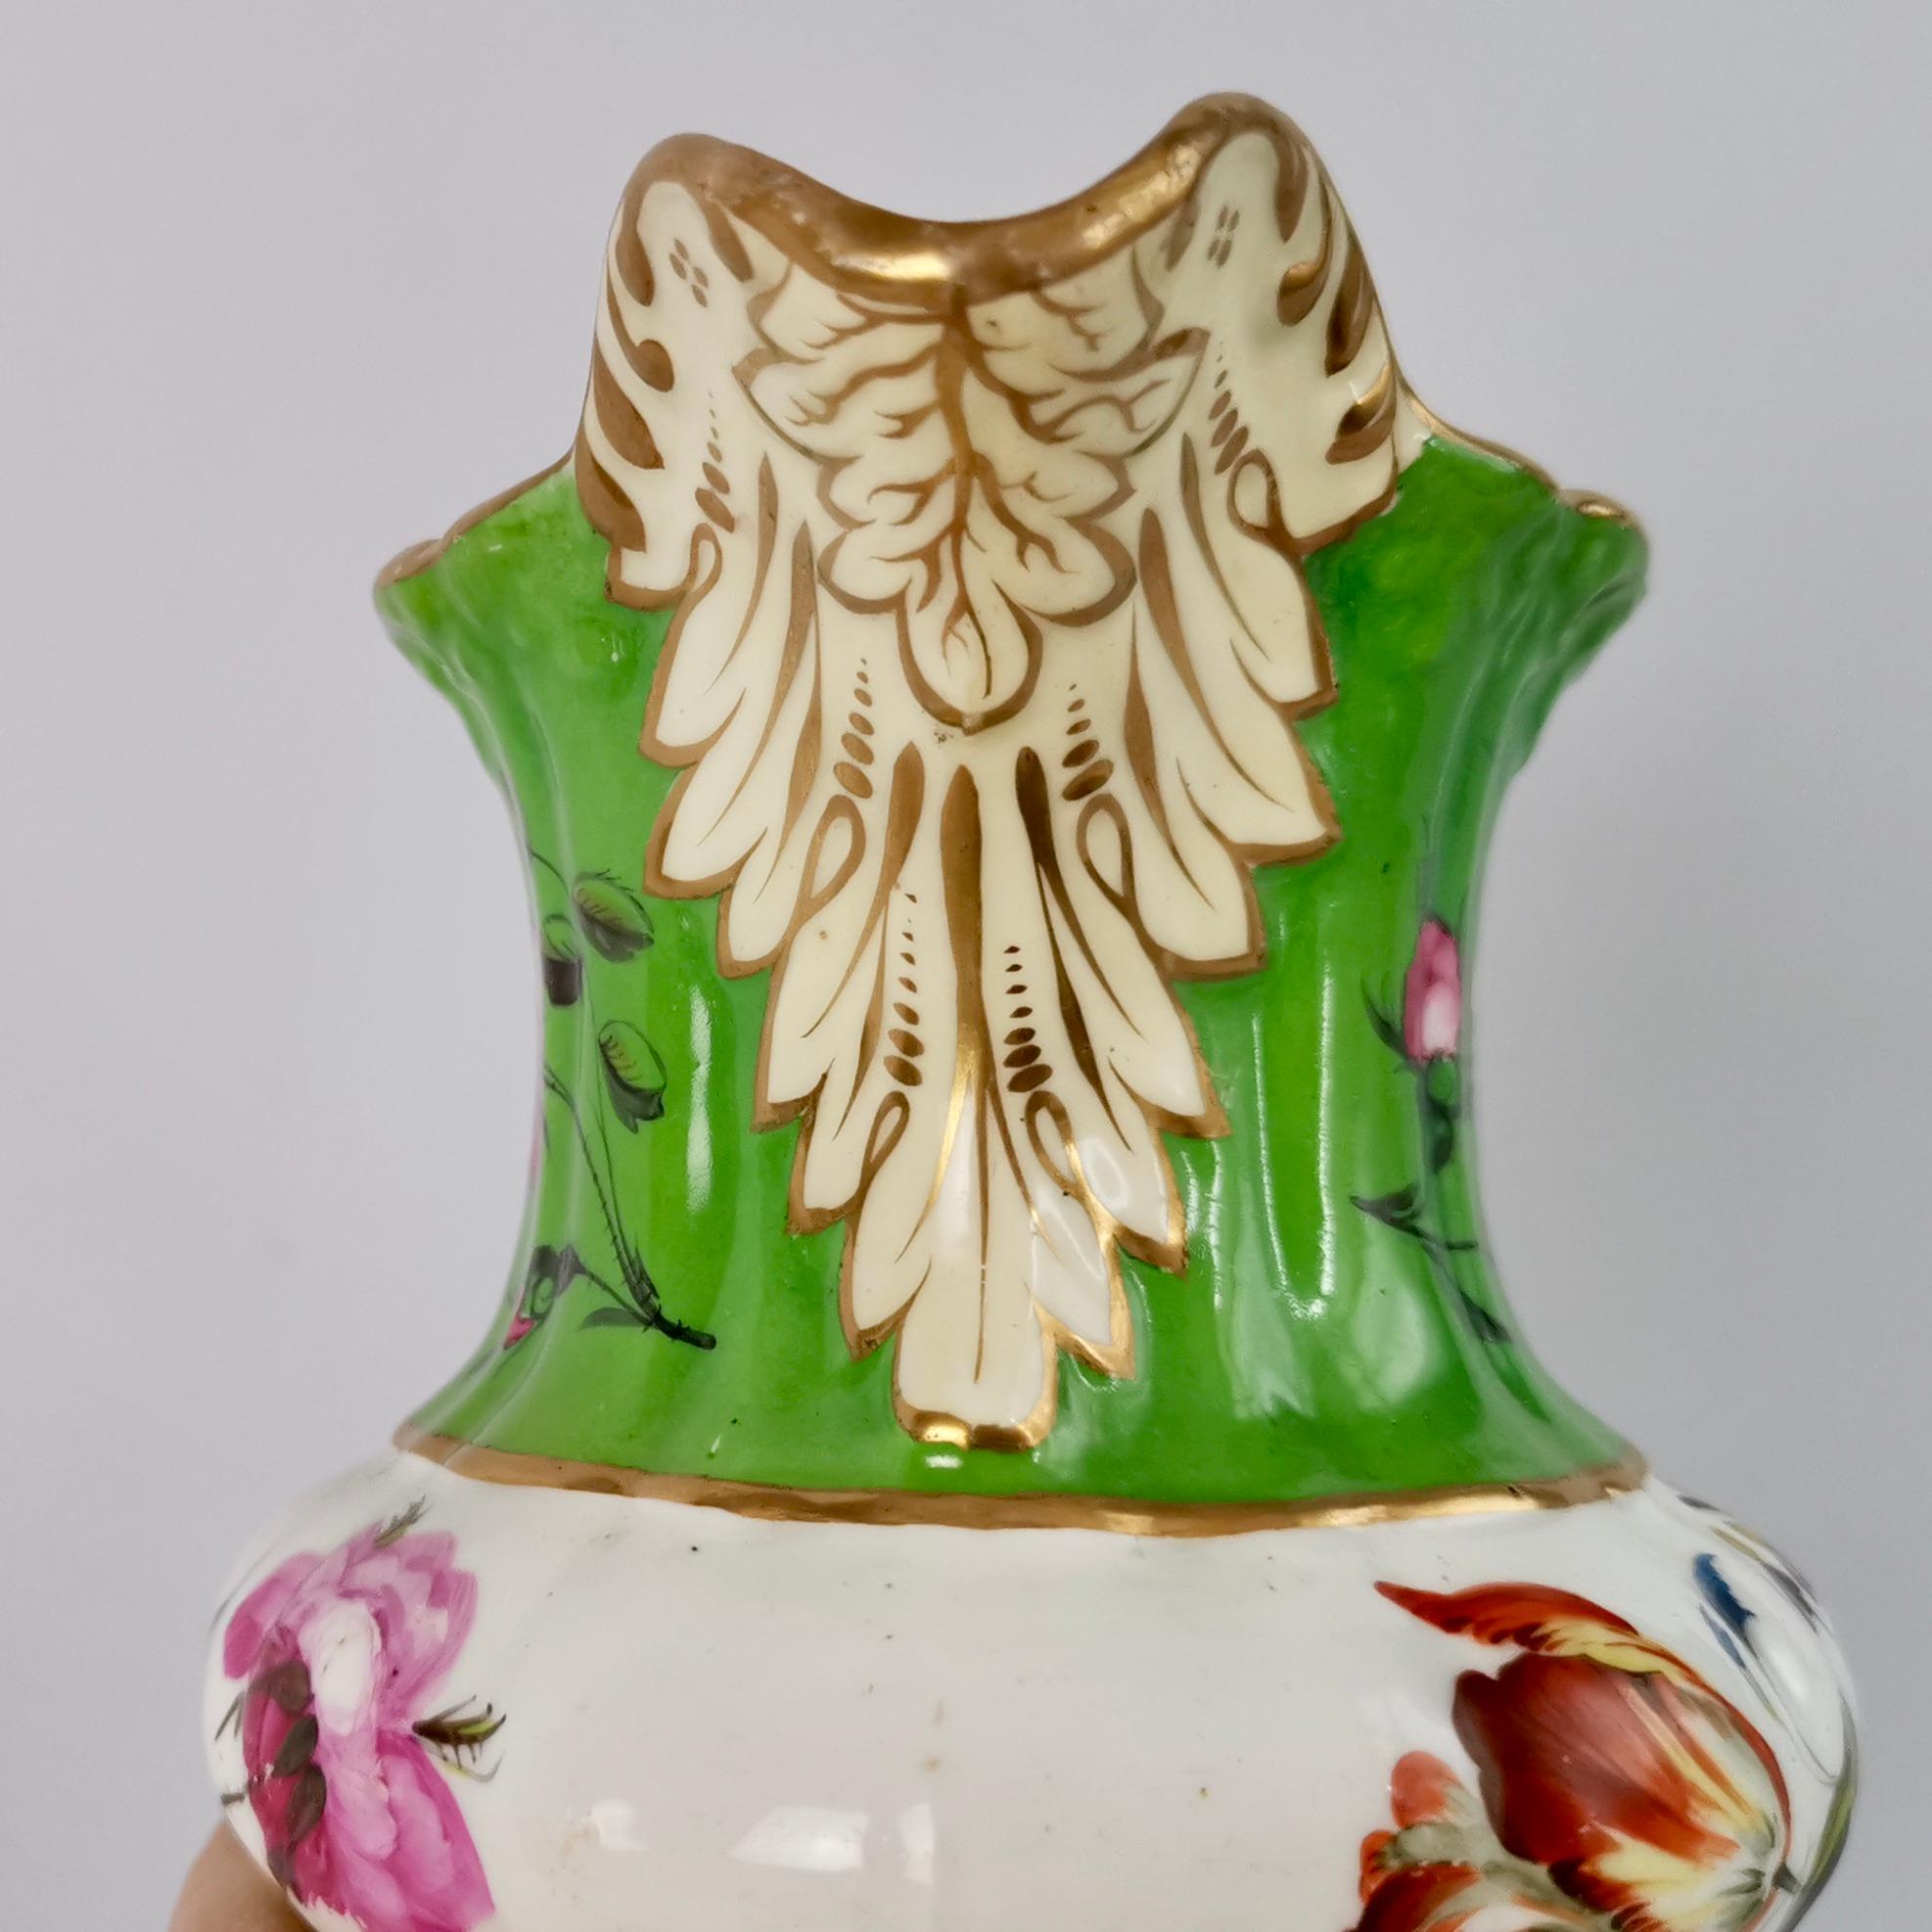 Hilditch Porcelain Pitcher, Apple Green with Hand Painted Flowers, circa 1830 4